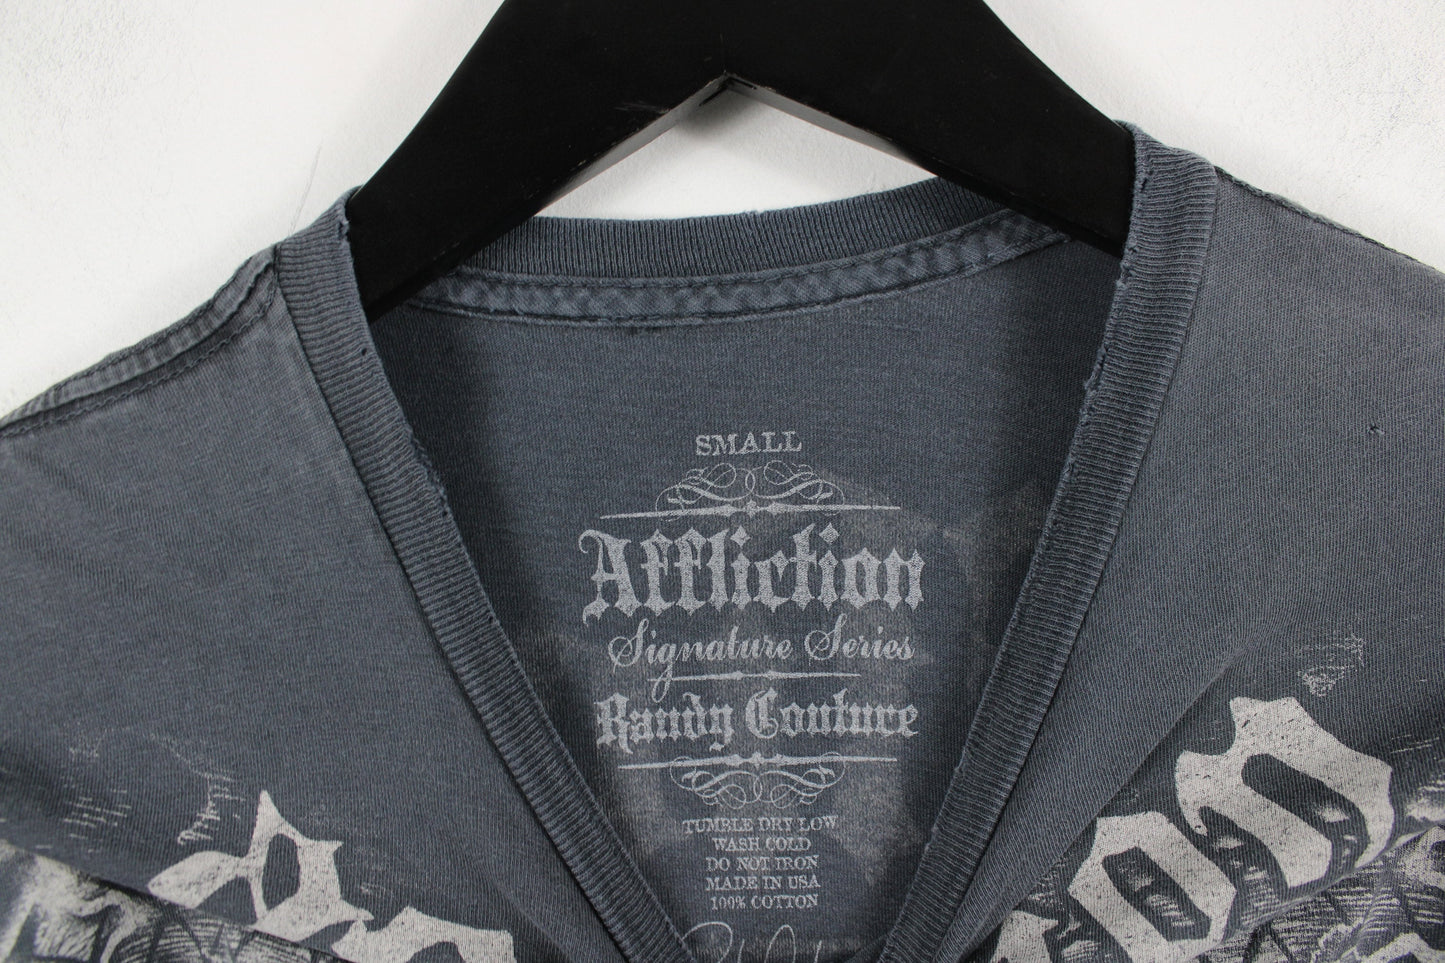 Affliction T-Shirt / Vintage Active-Wear Company / 90s-2000s Extreme Coutoure Tee Shirt / Y2K Graphic